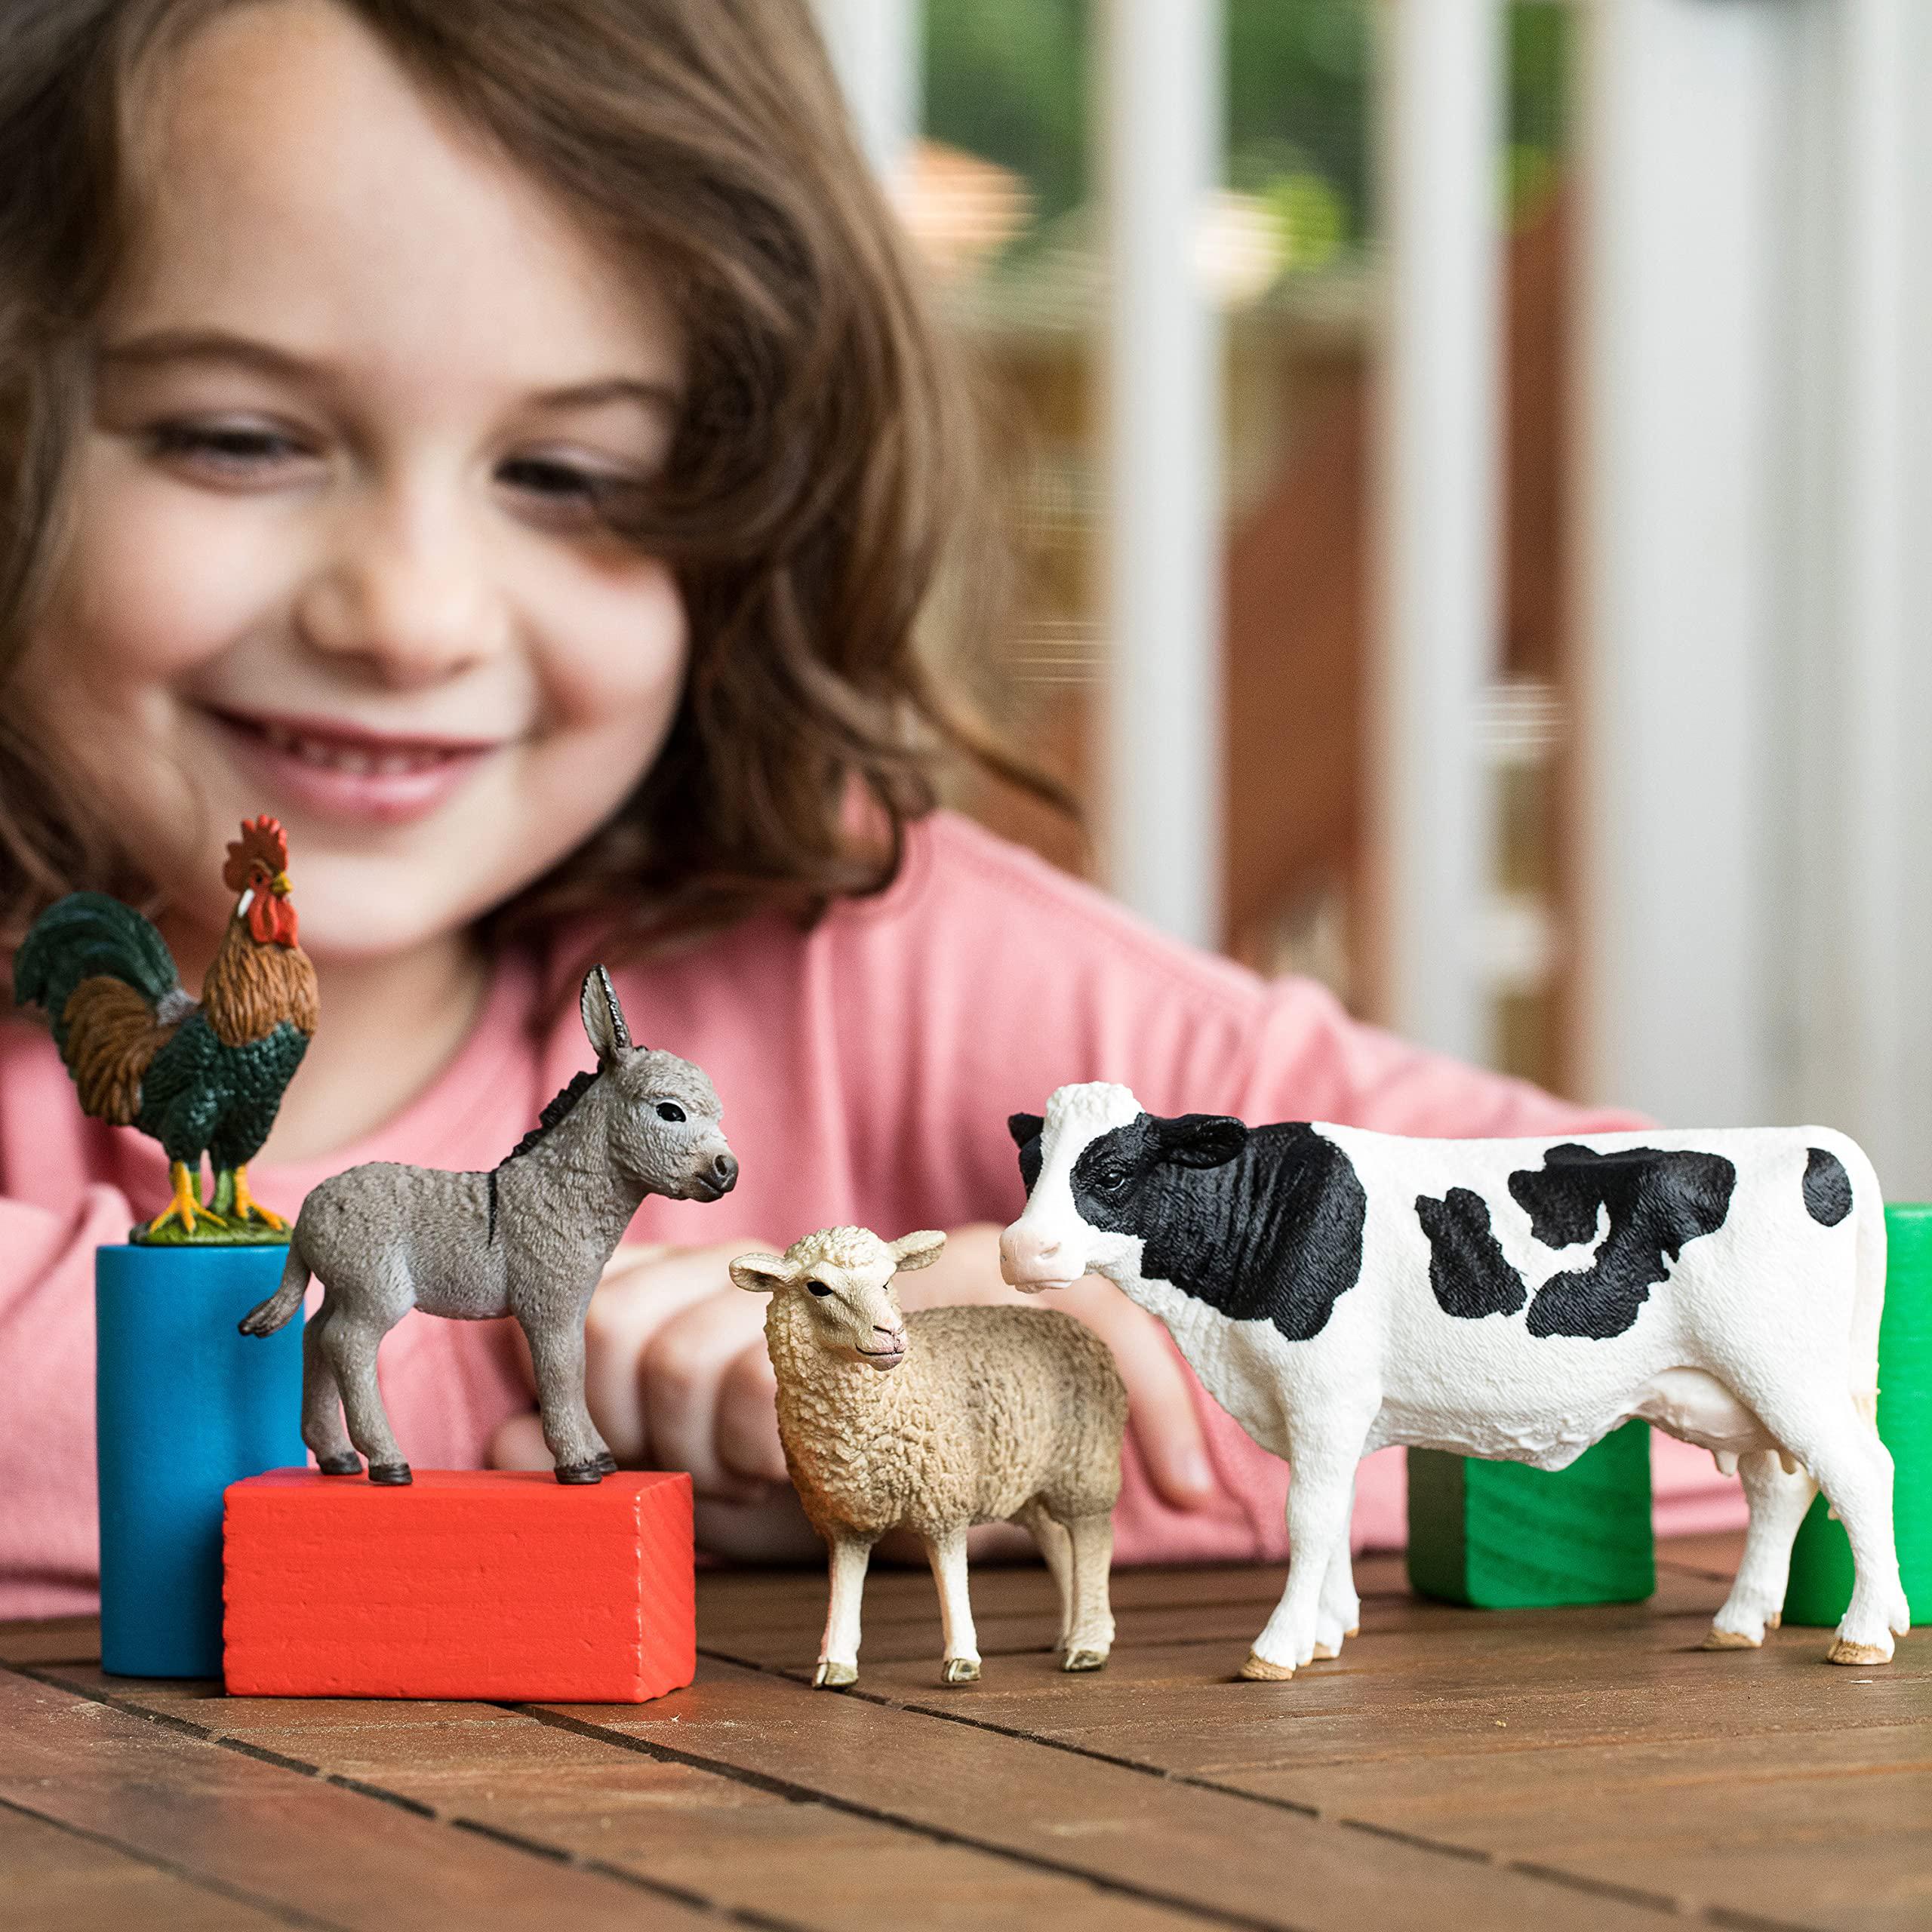 schleich farm animal toys and playsets - farm world 4 piece starter set with cow, rooster, sheep, and donkey figurine, farmin